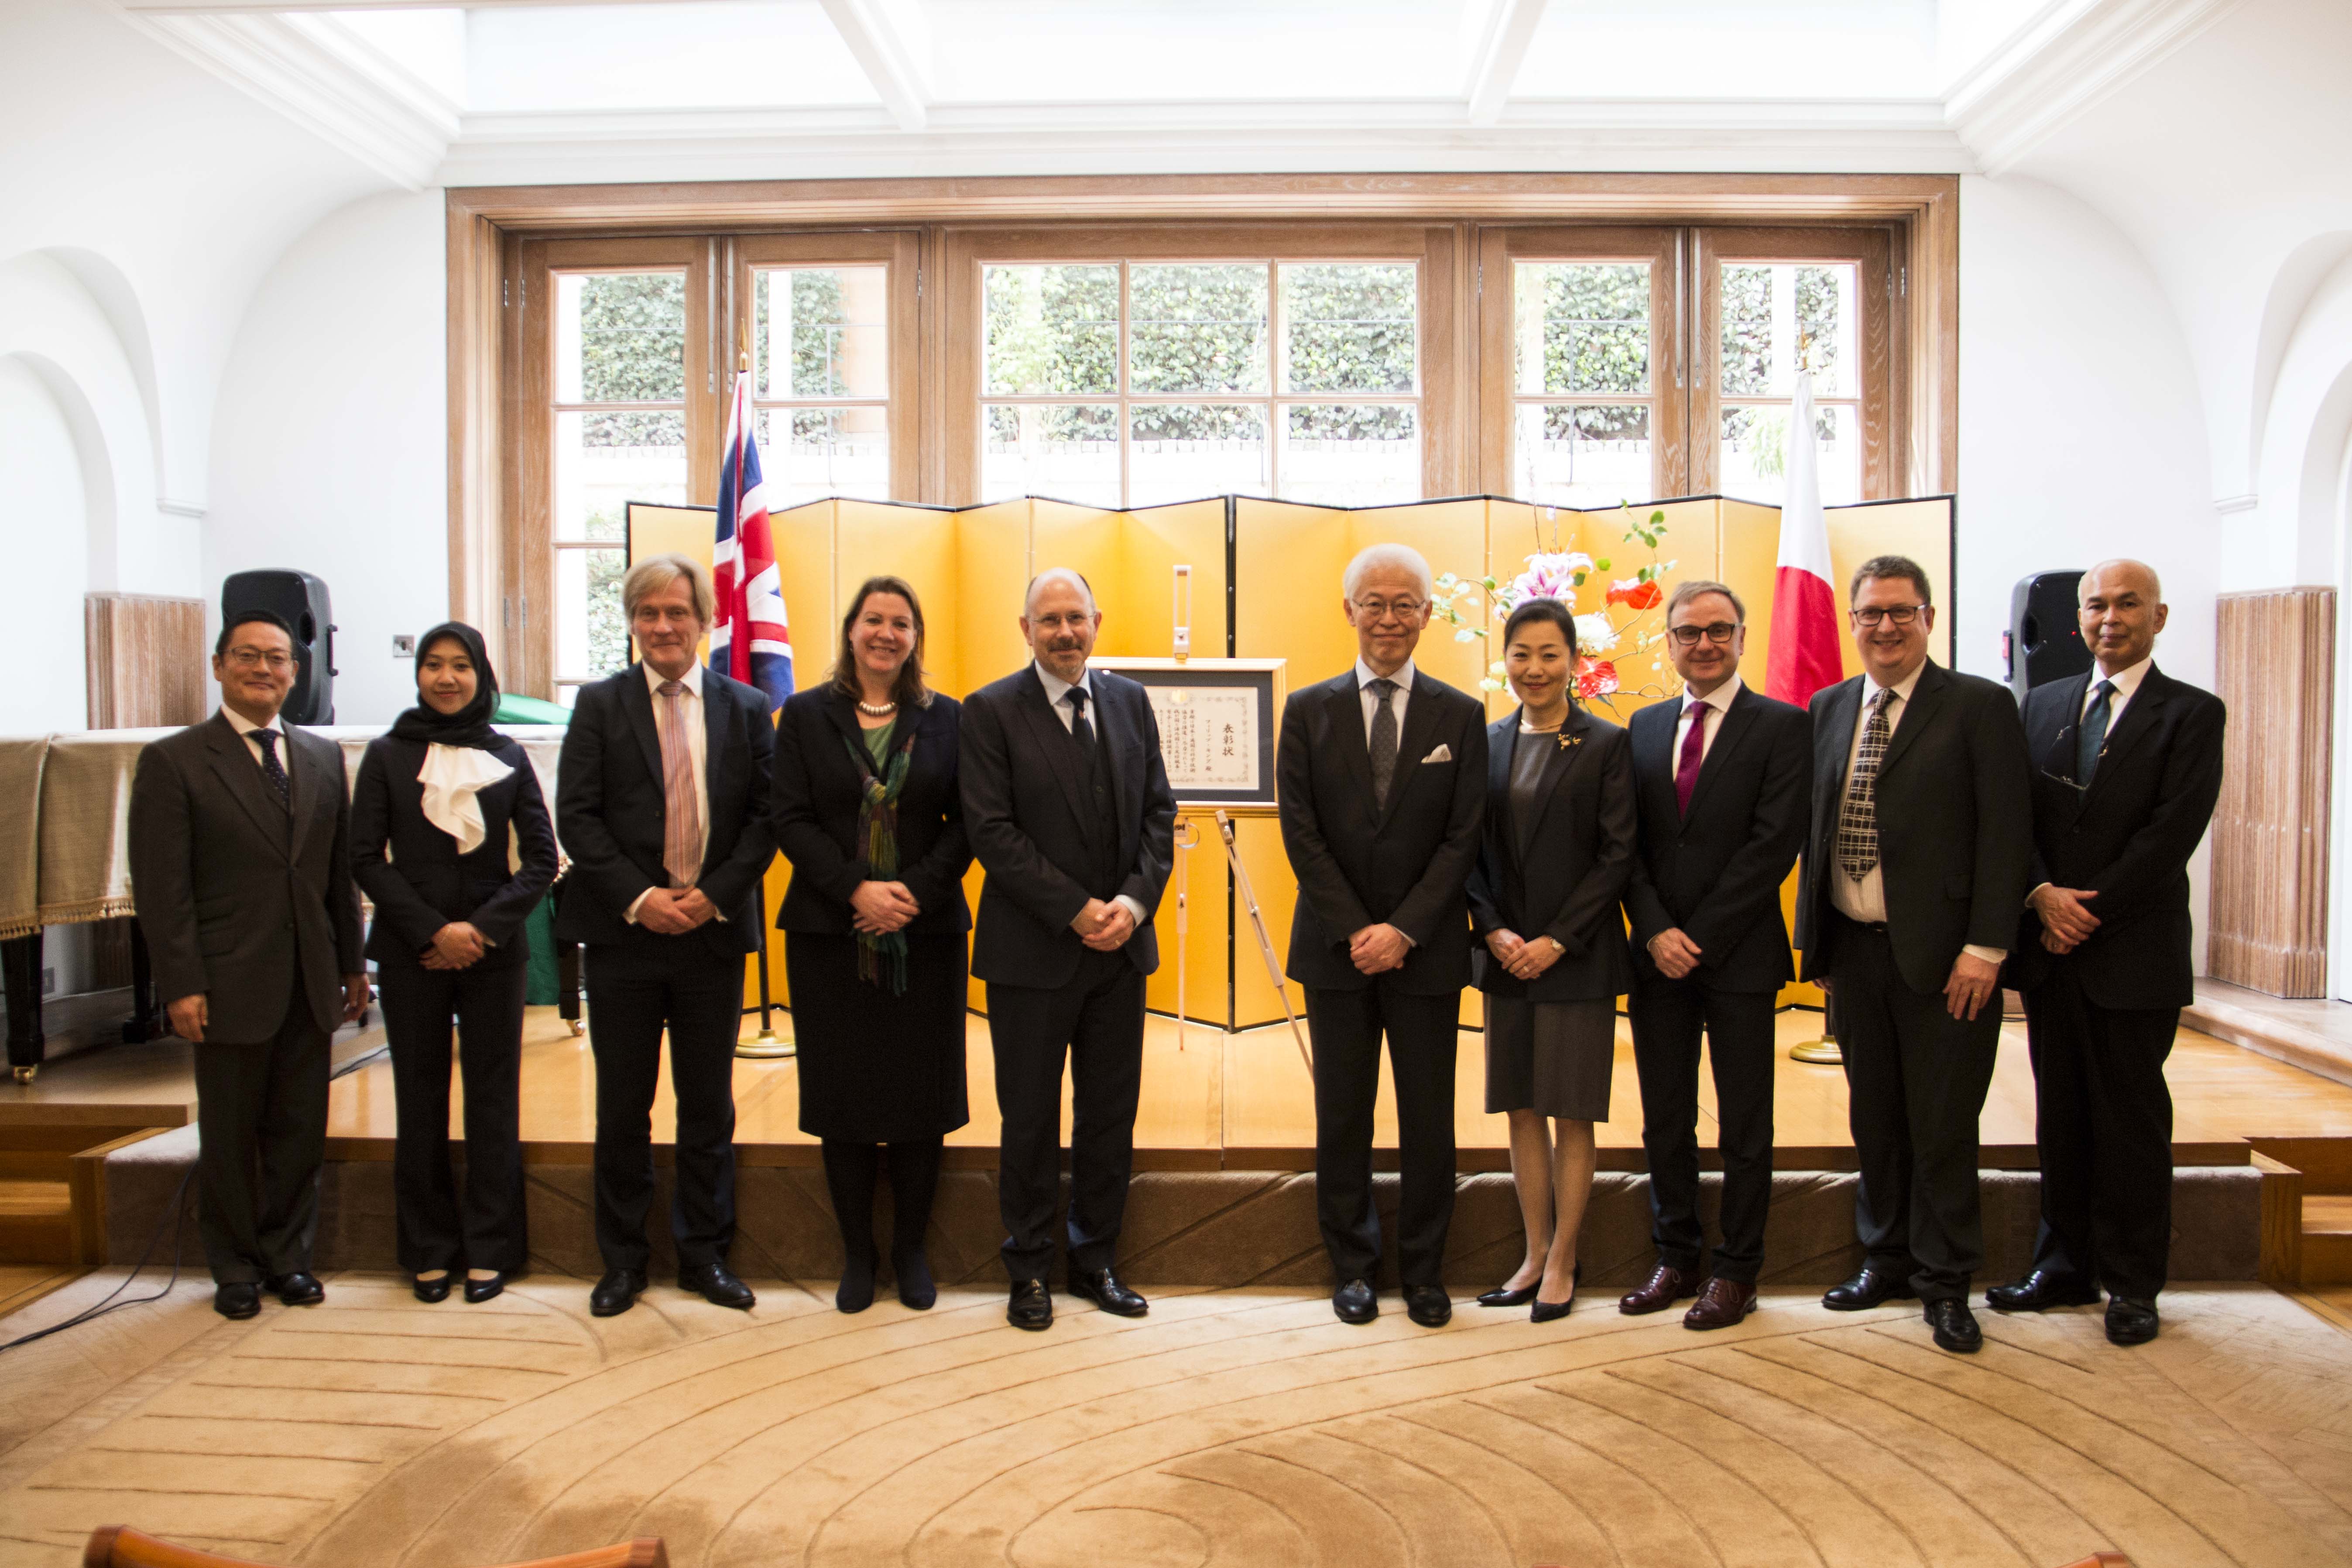 Group photo showing attendees of the commendation event at the Japanese Embassy in the UK.